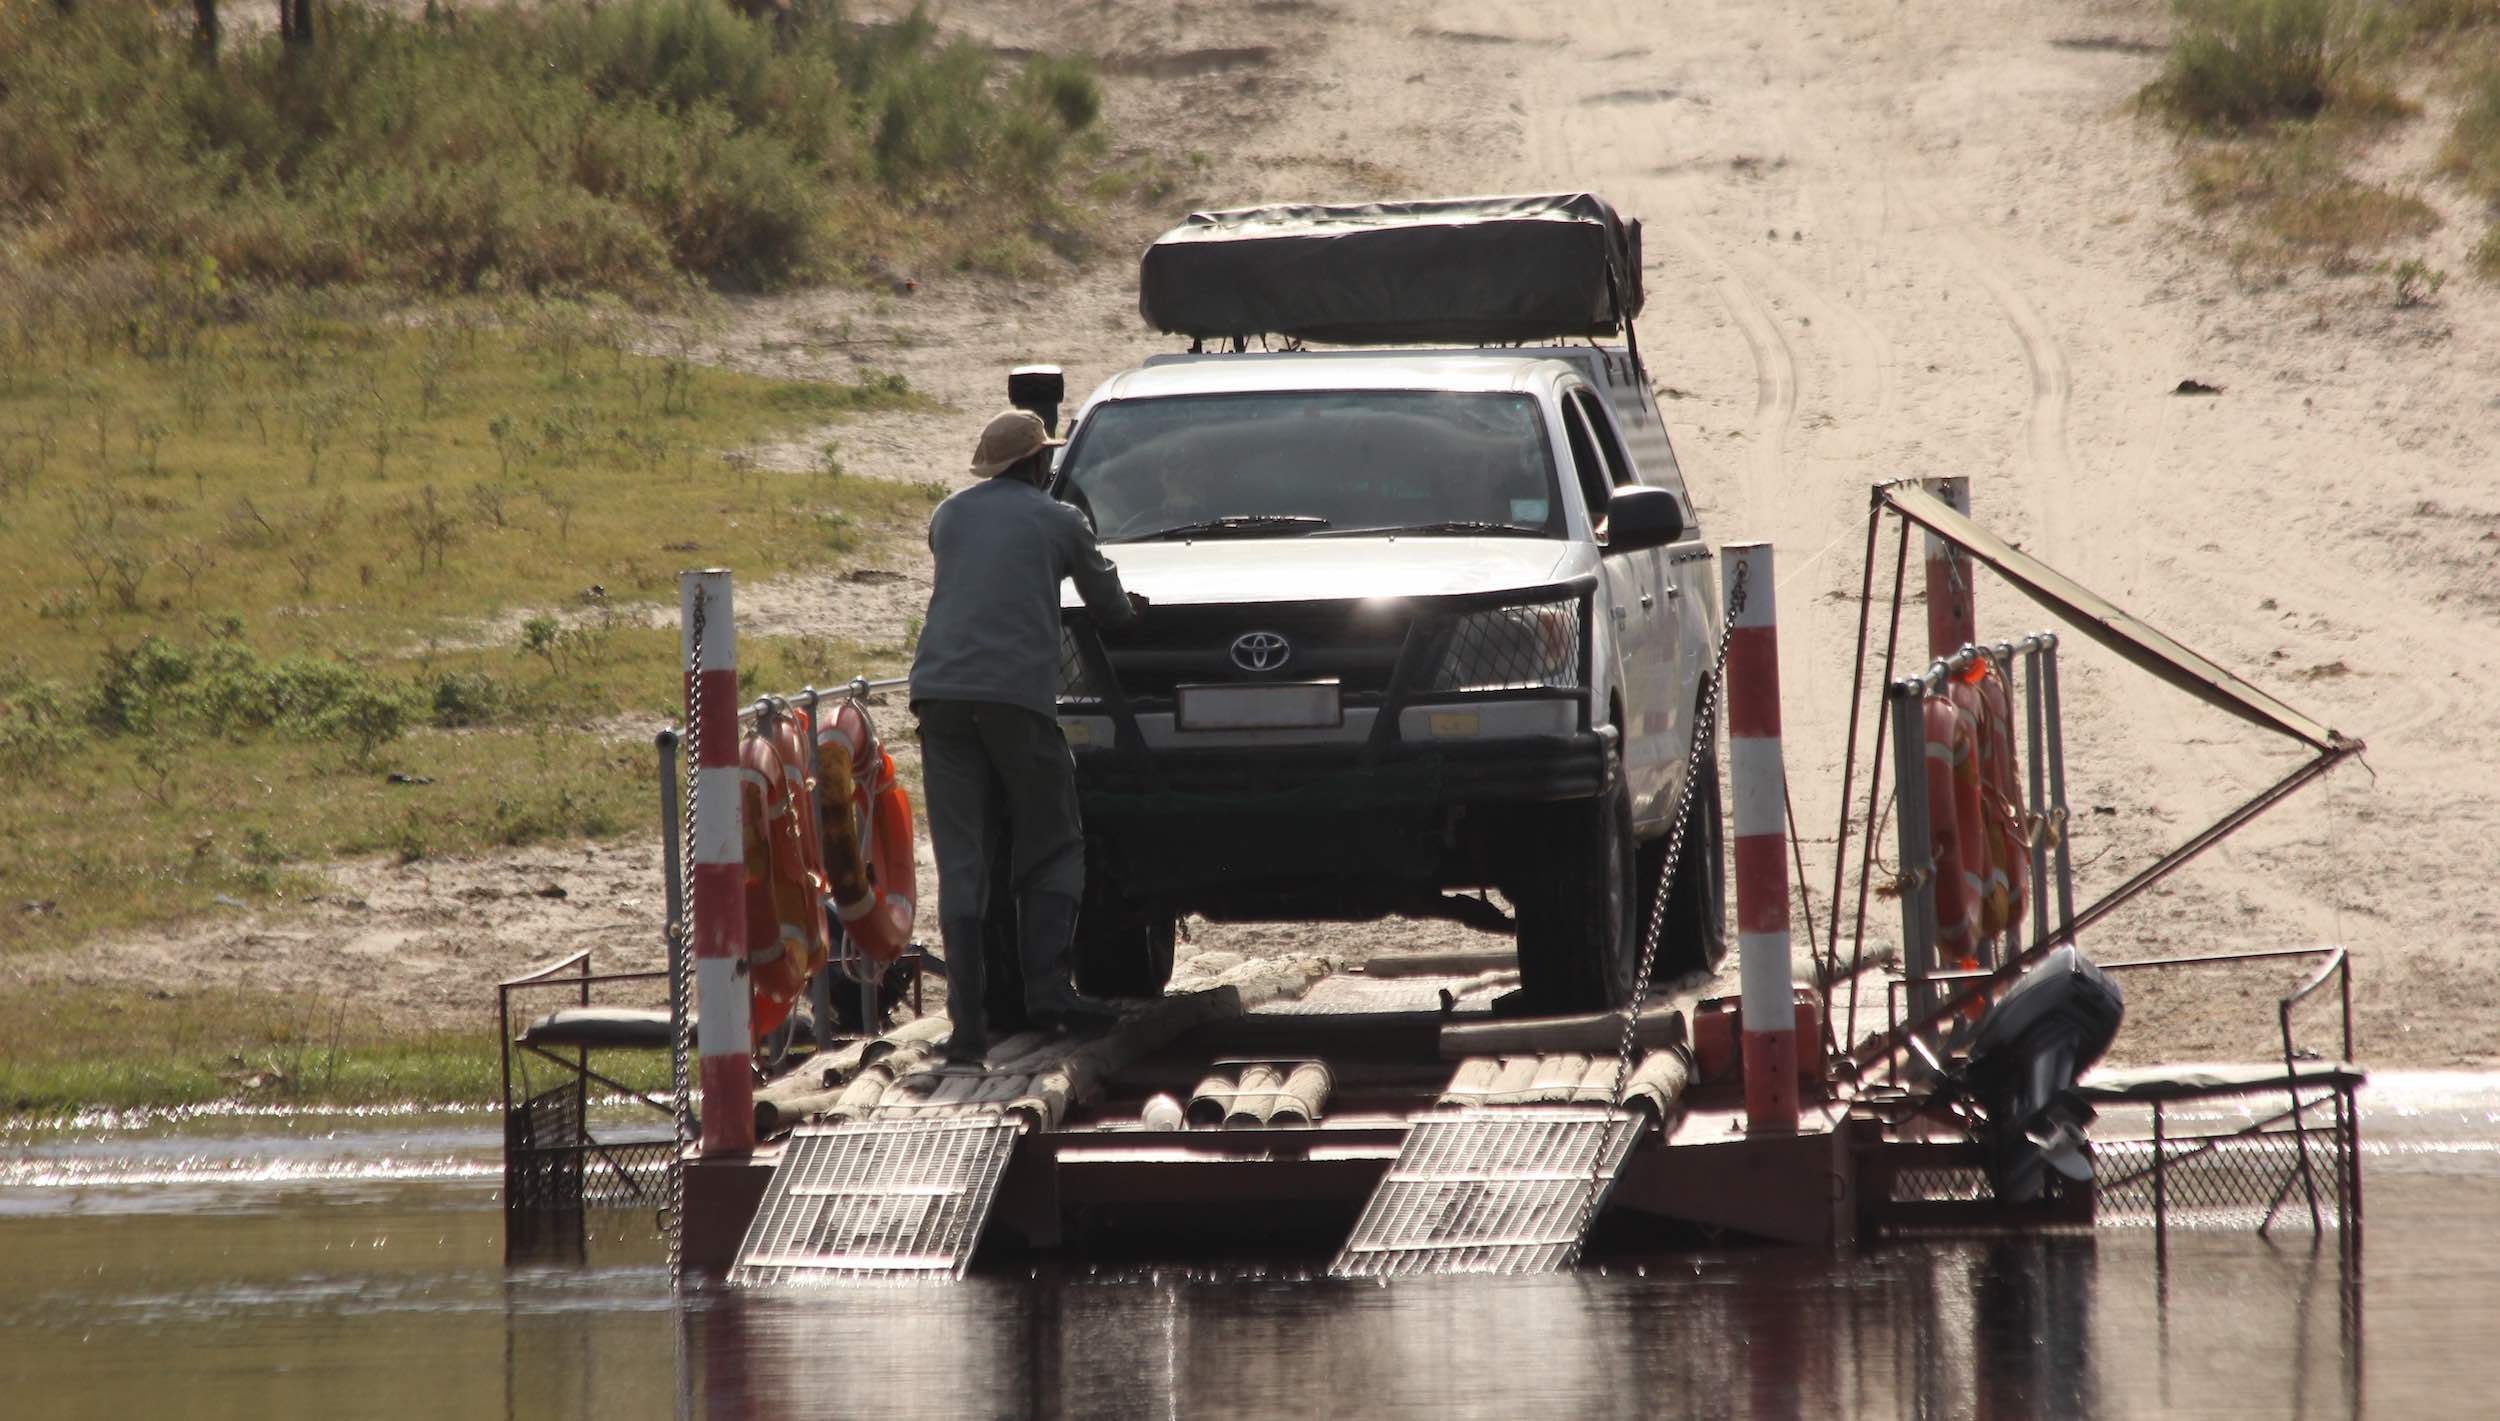 A Toyota bakkie prepares to cross the Boteti river on the local ferry.